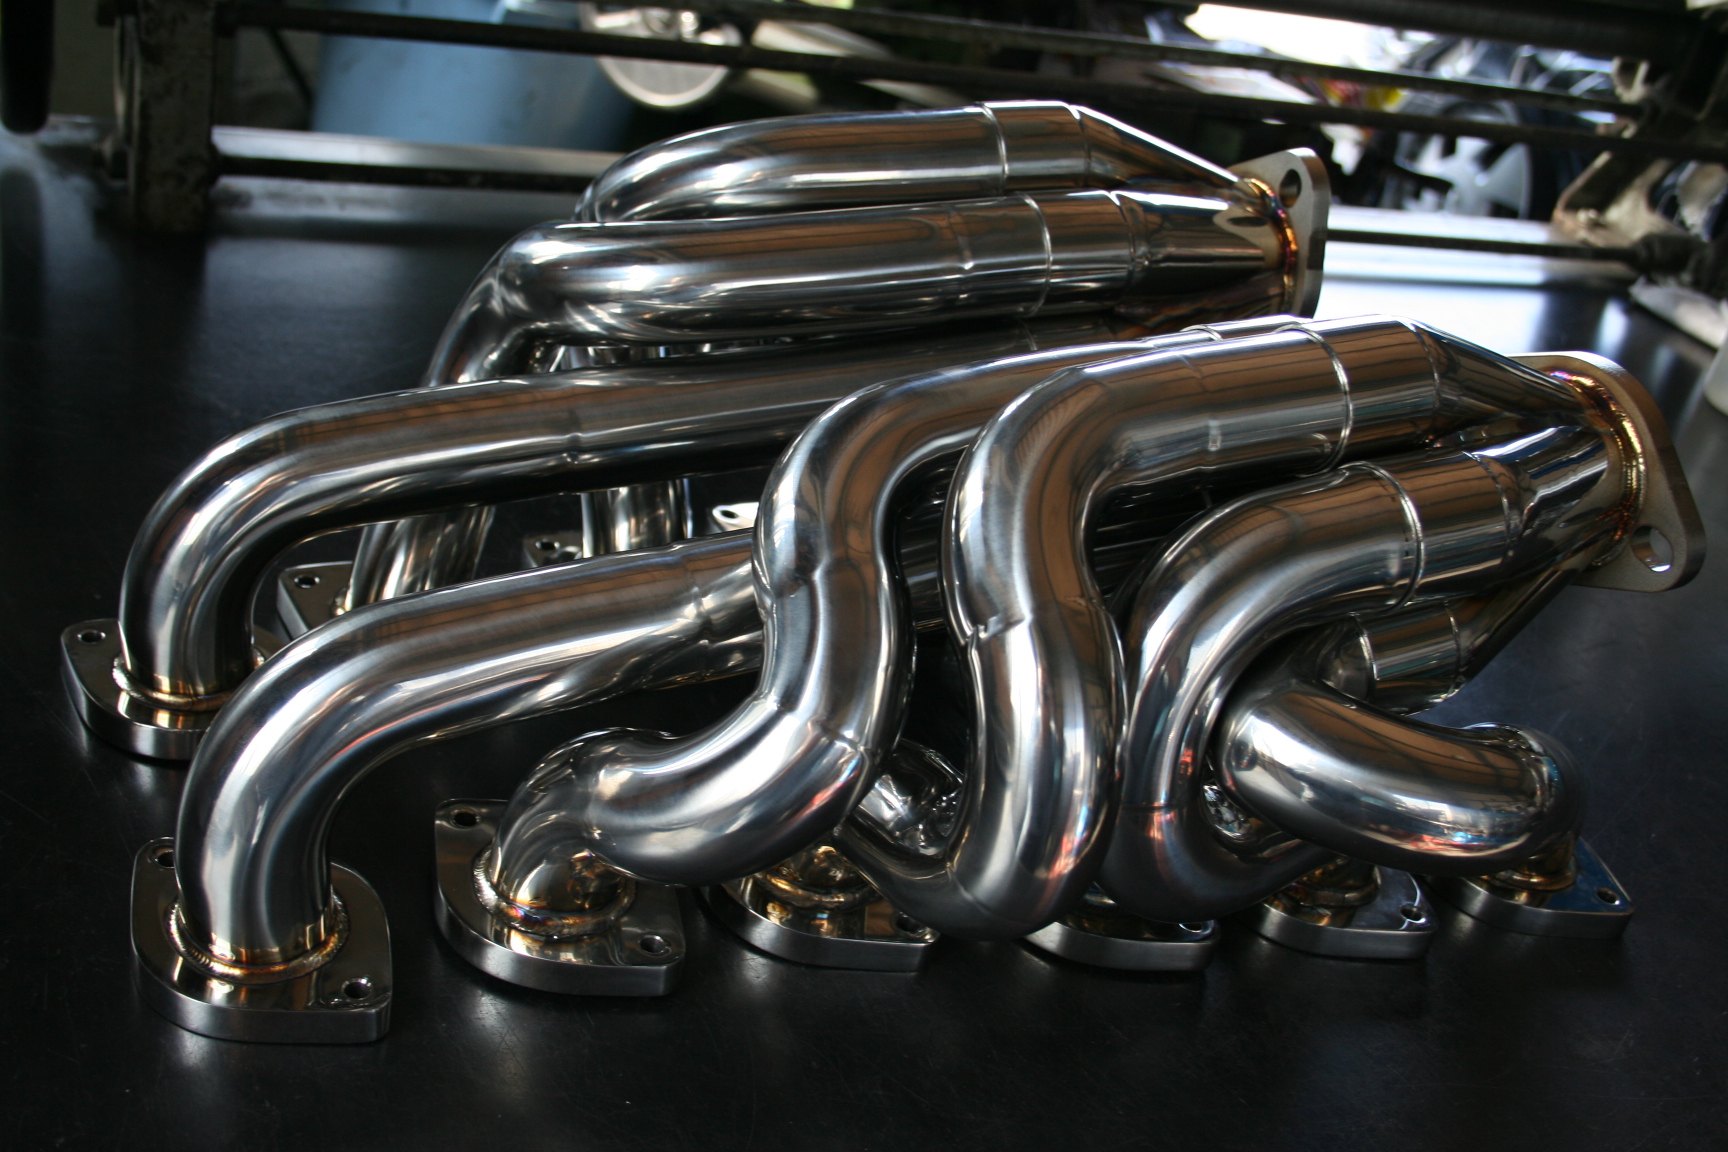 Homemade S600 F1 Exhaust: Imitation Is the Sincerest Form of